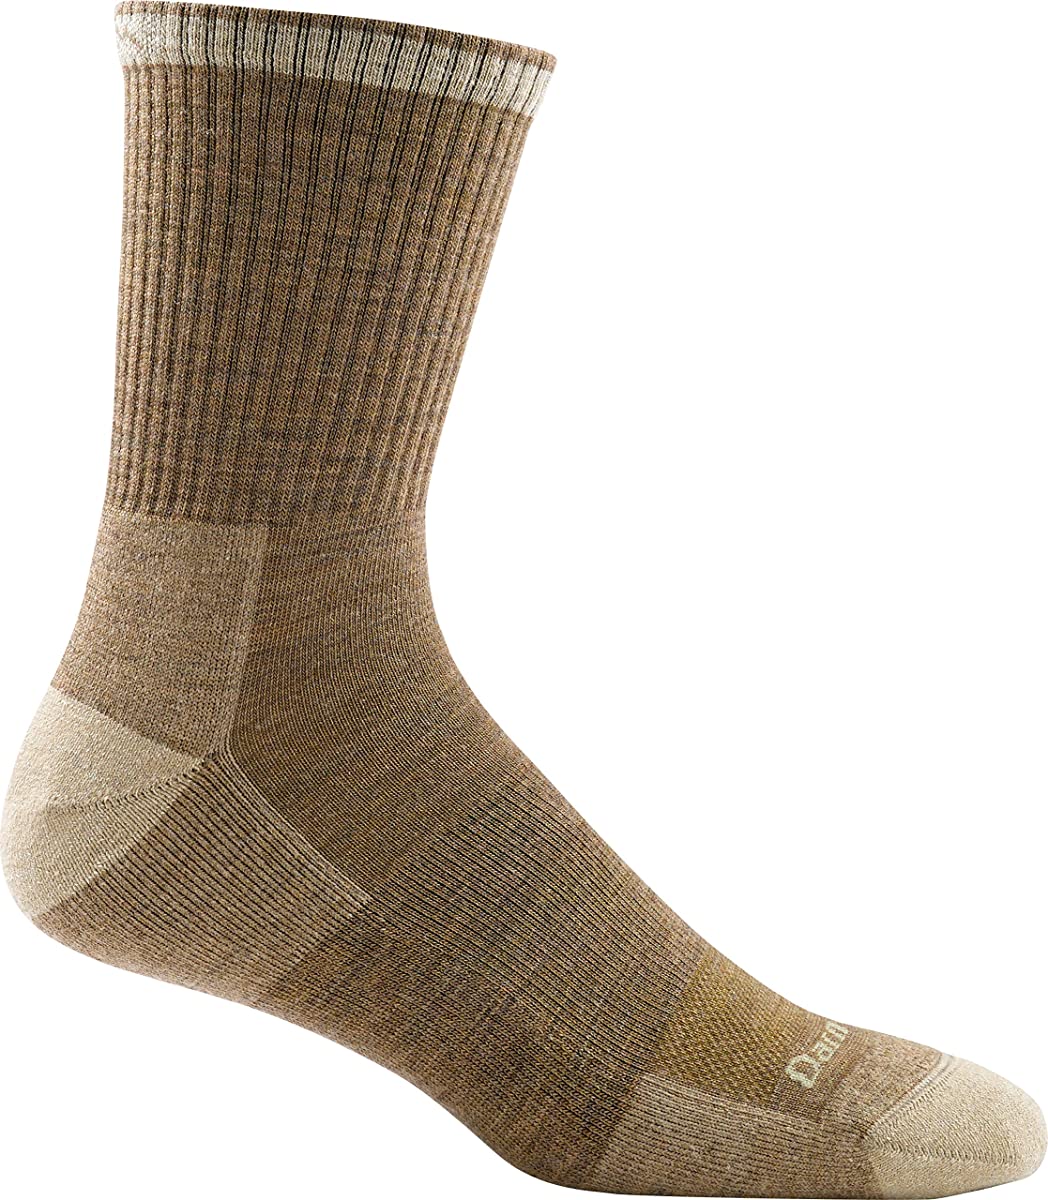 Men's Darn Tough Fred Tuttle Micro Crew Cushion Sock in Sand from the side view